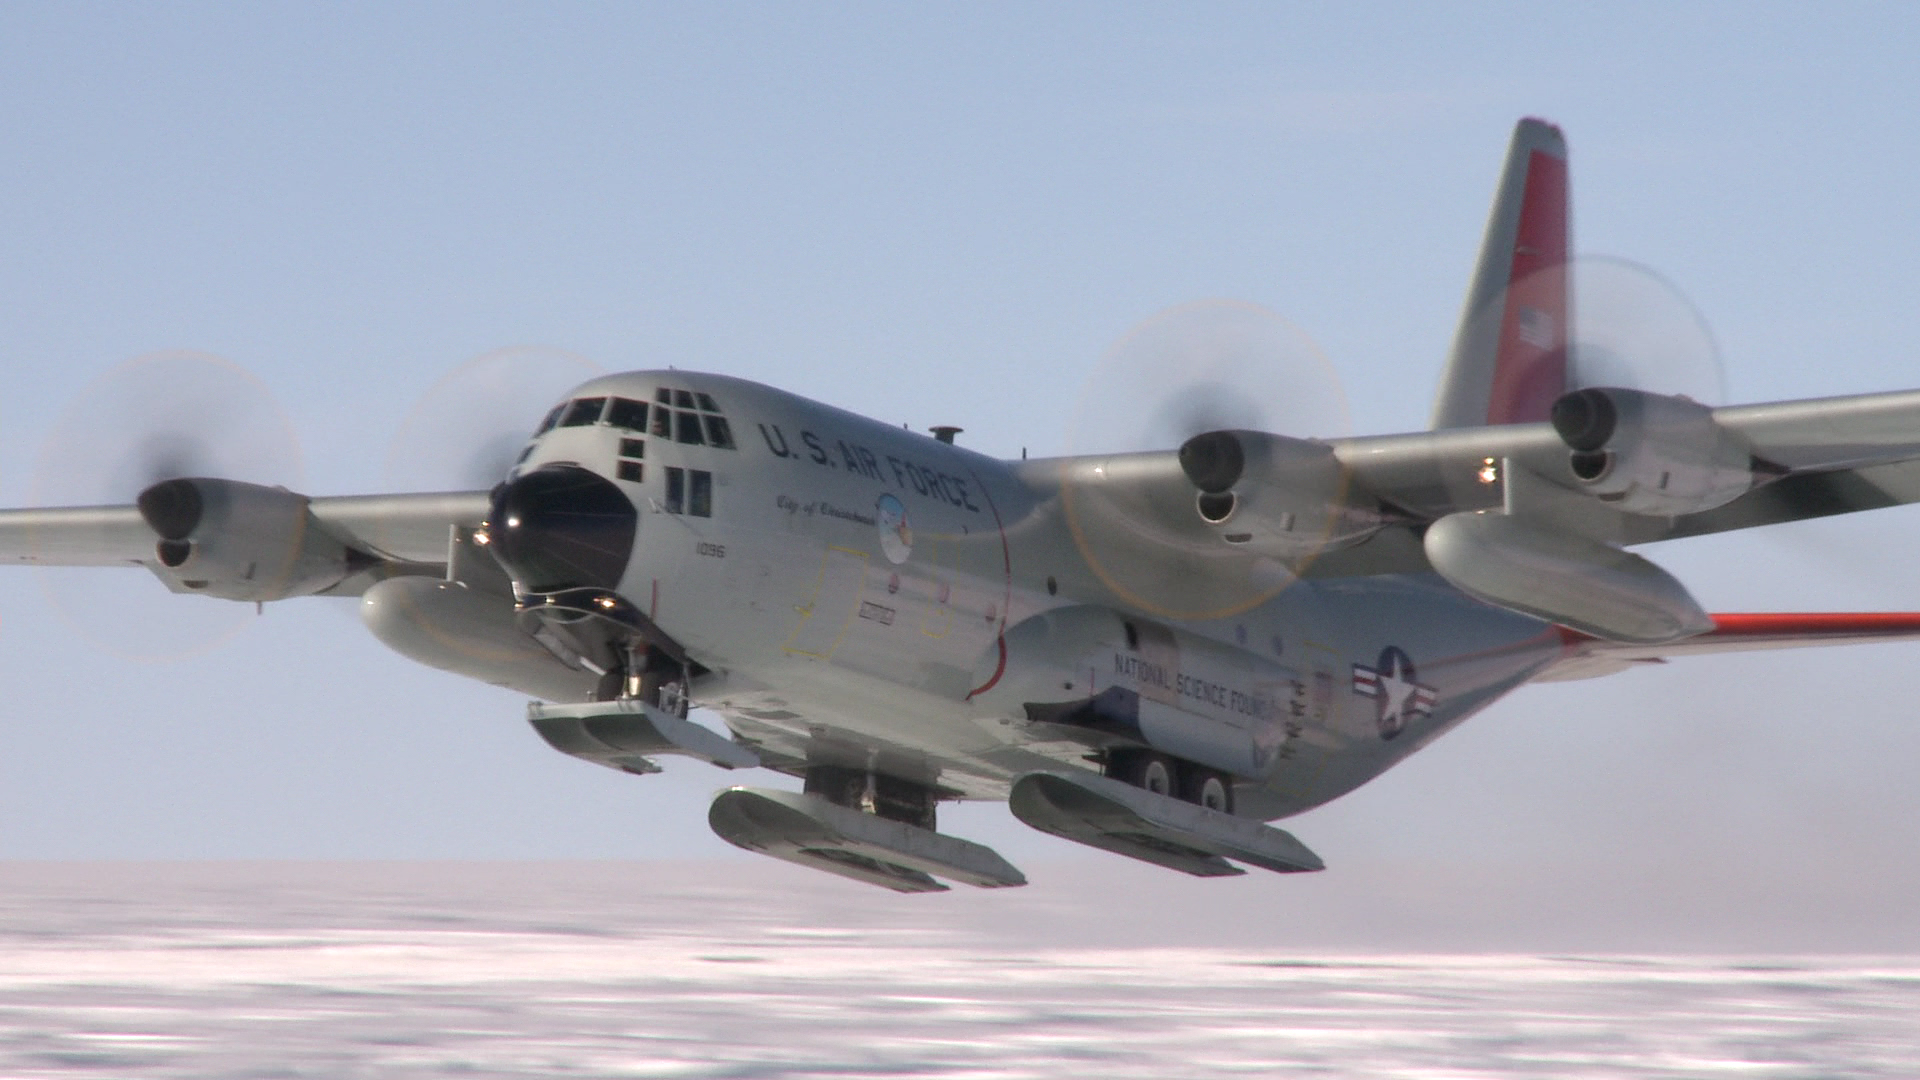 Hercules plane take-off from the ice sheet